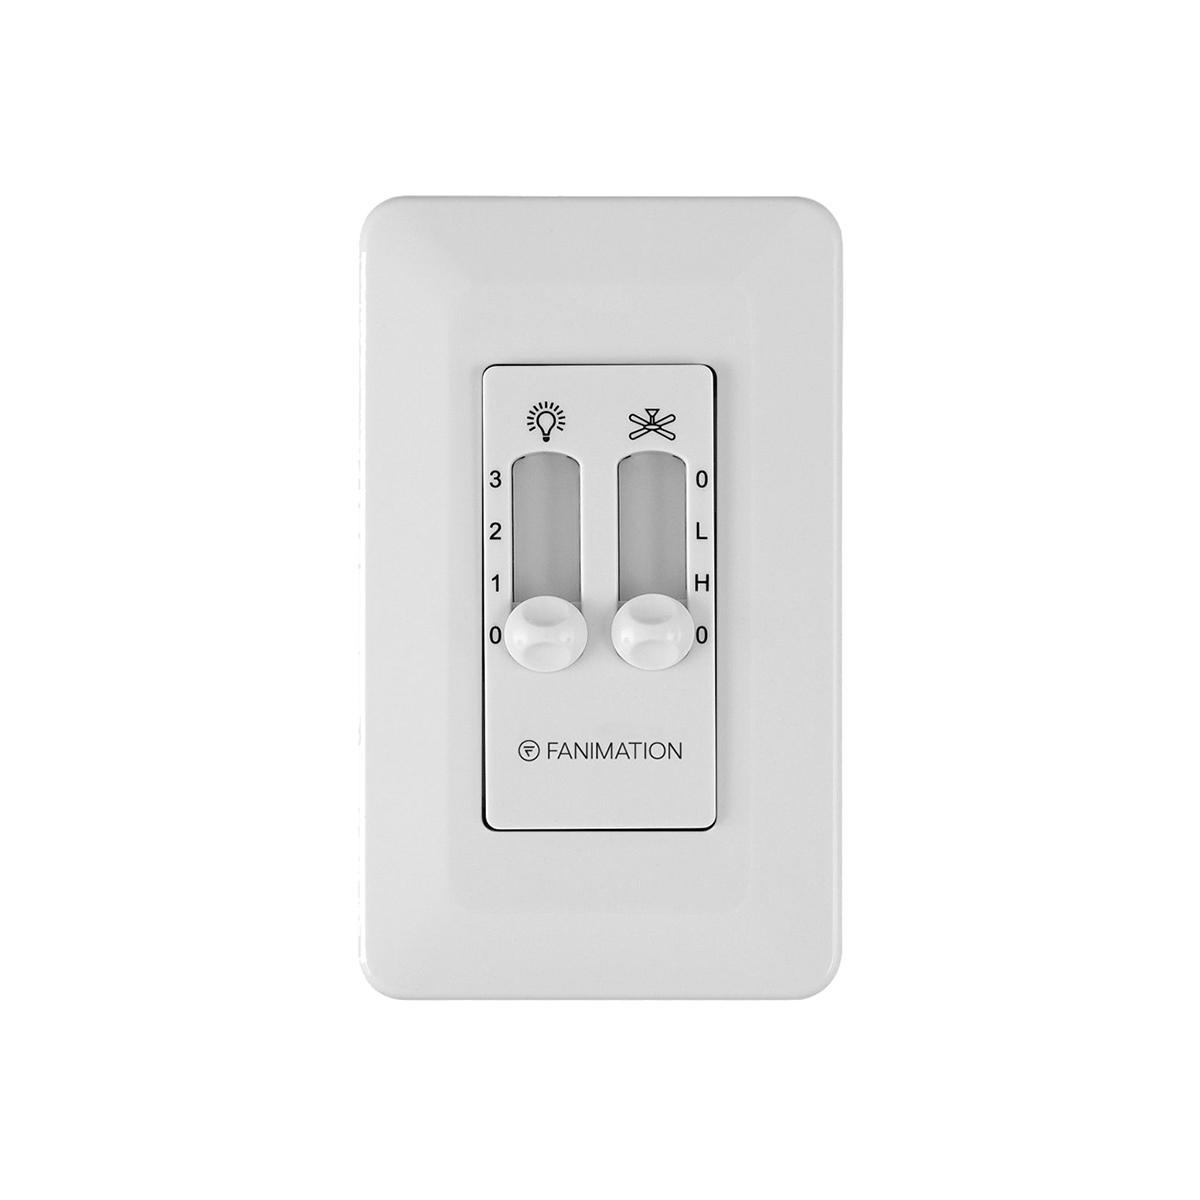 2-Speed Ceiling Fan And Light Wall Control, White Finish - Bees Lighting